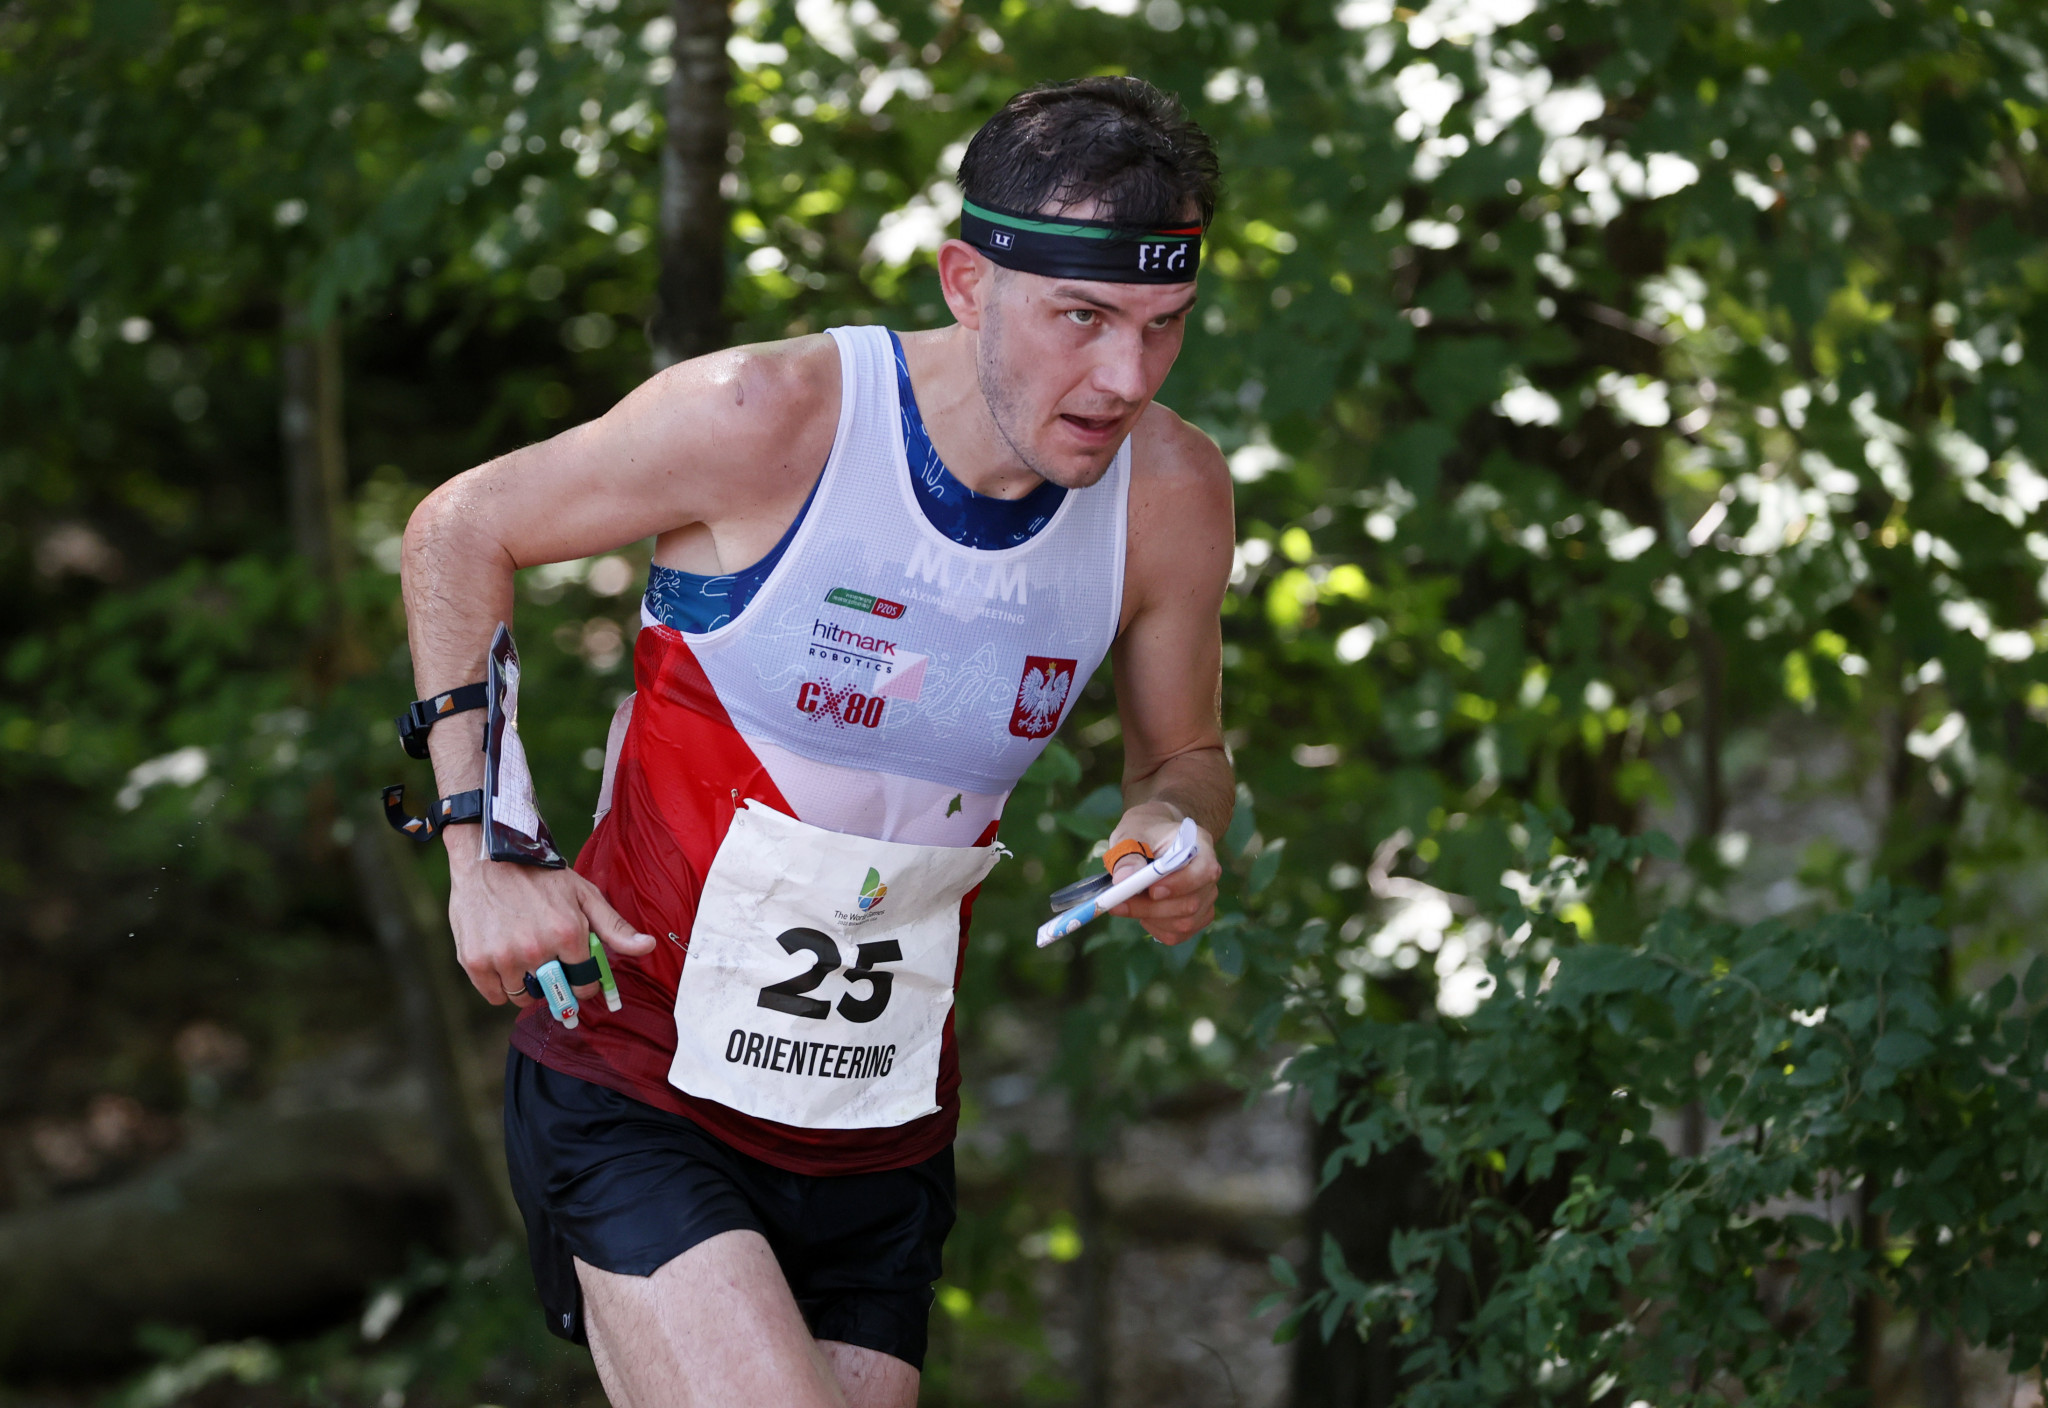 Athletes had to navigate their way through the orienteering middle distance course ©The World Games 2022